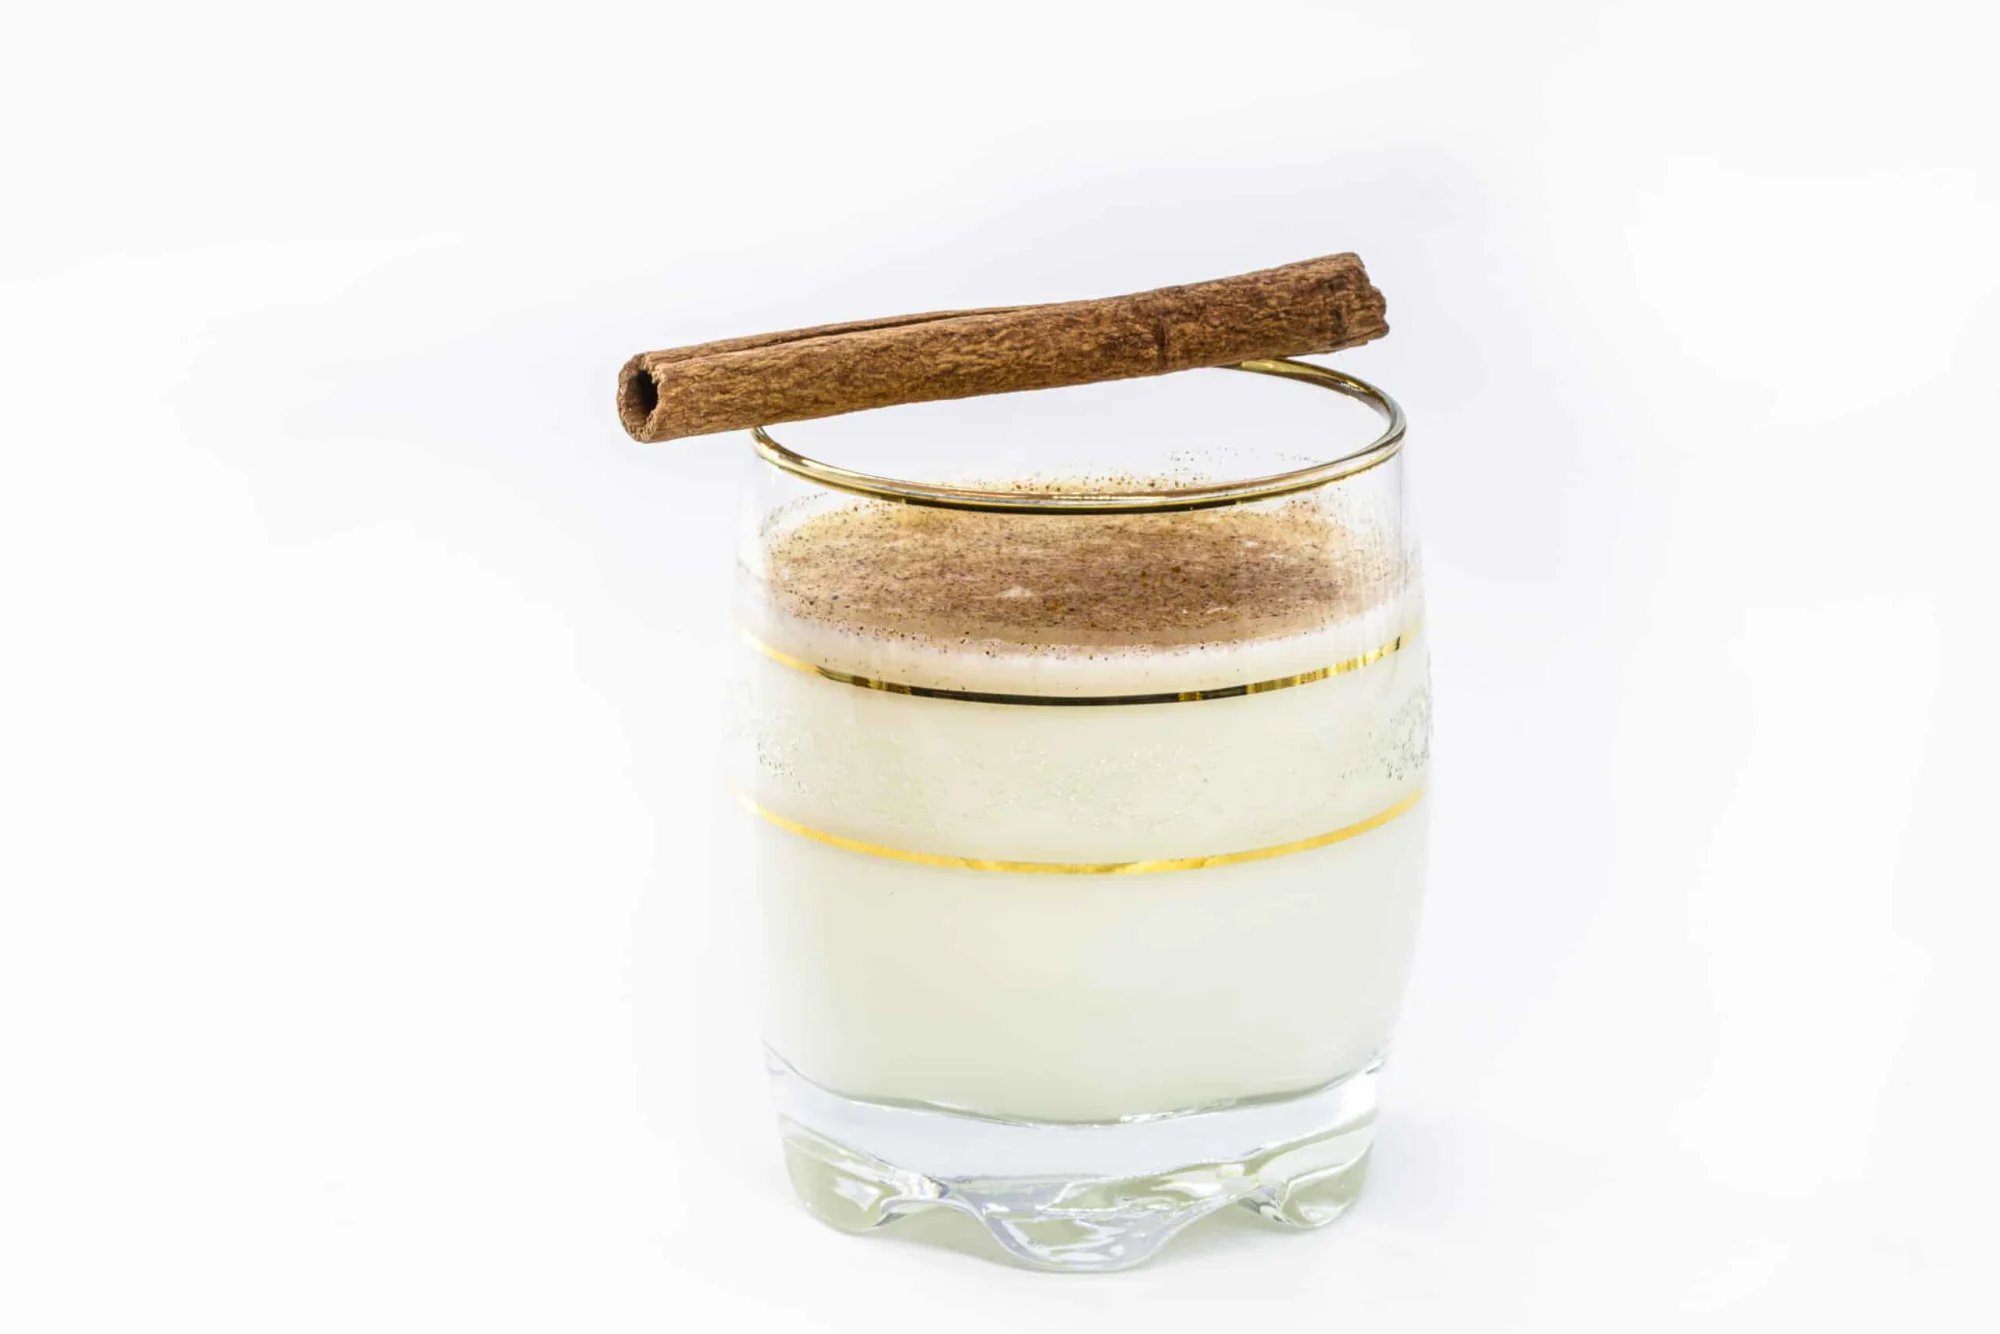 a small round glass with thin gold stripes filled with a white liquid, dusted with a brown spice, with a cinnamon stick laid on top of the glass